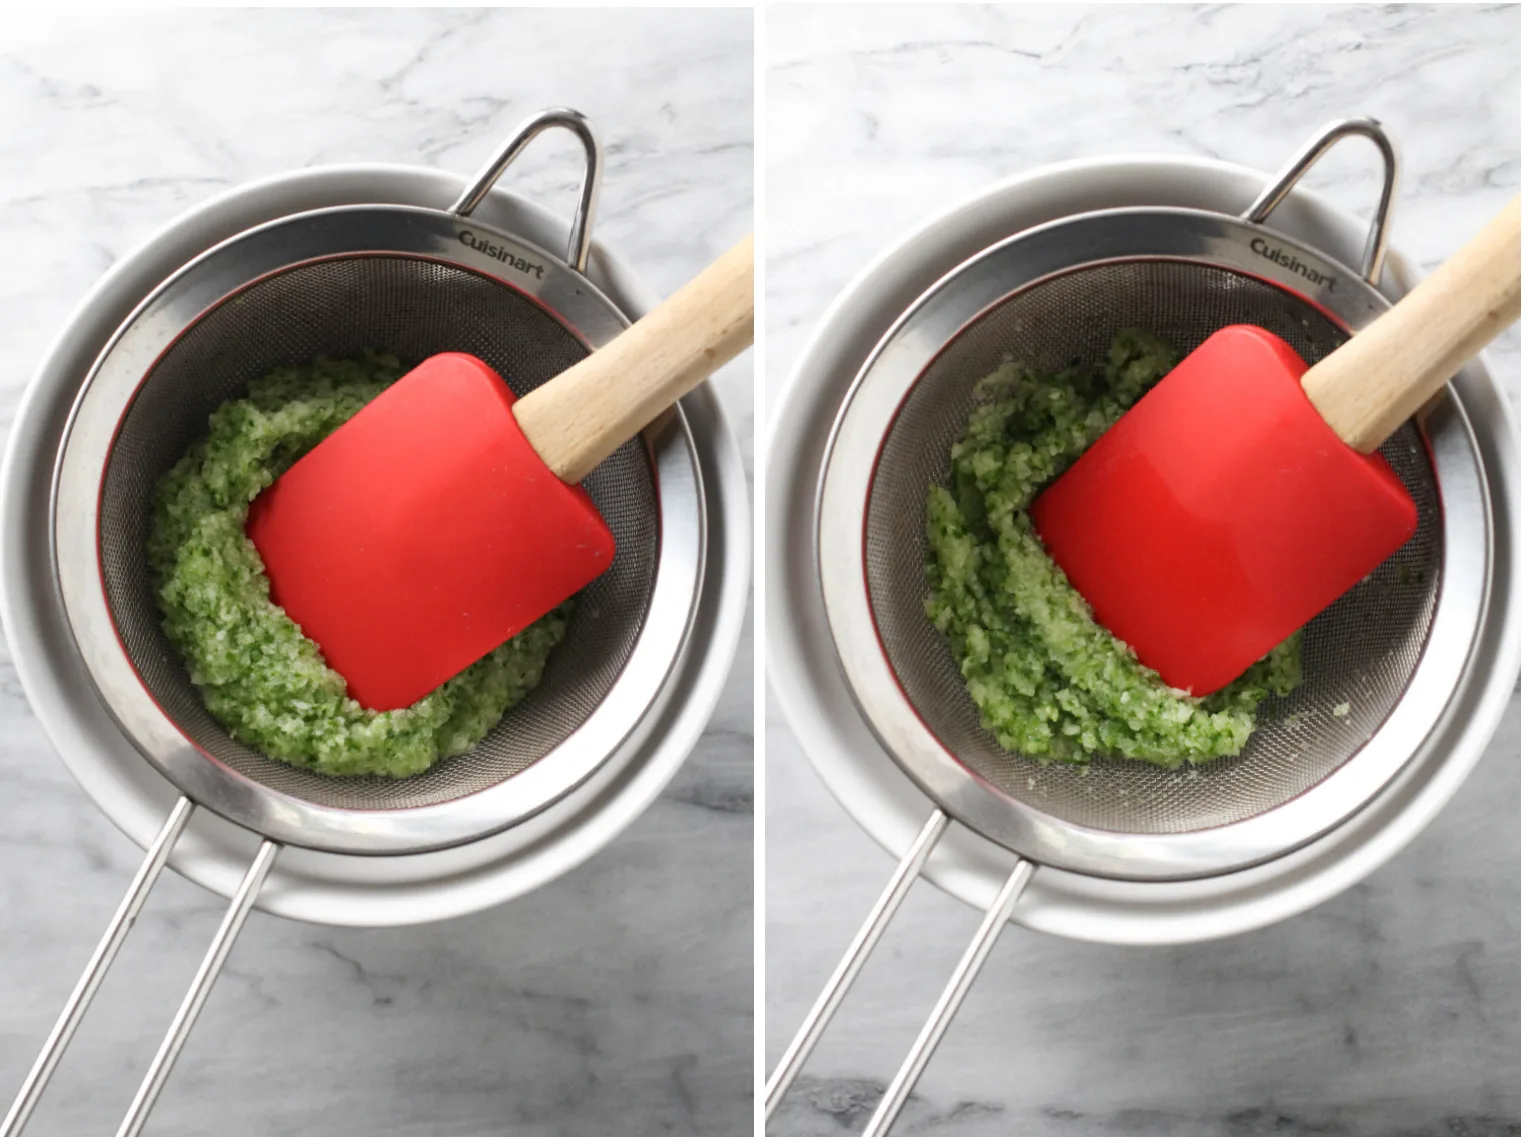 Two images side by side. On the left, cucumber puree in a strainer being pressed with a rubber spatula. On the right, dry pulp in a strainer with rupper spatula.